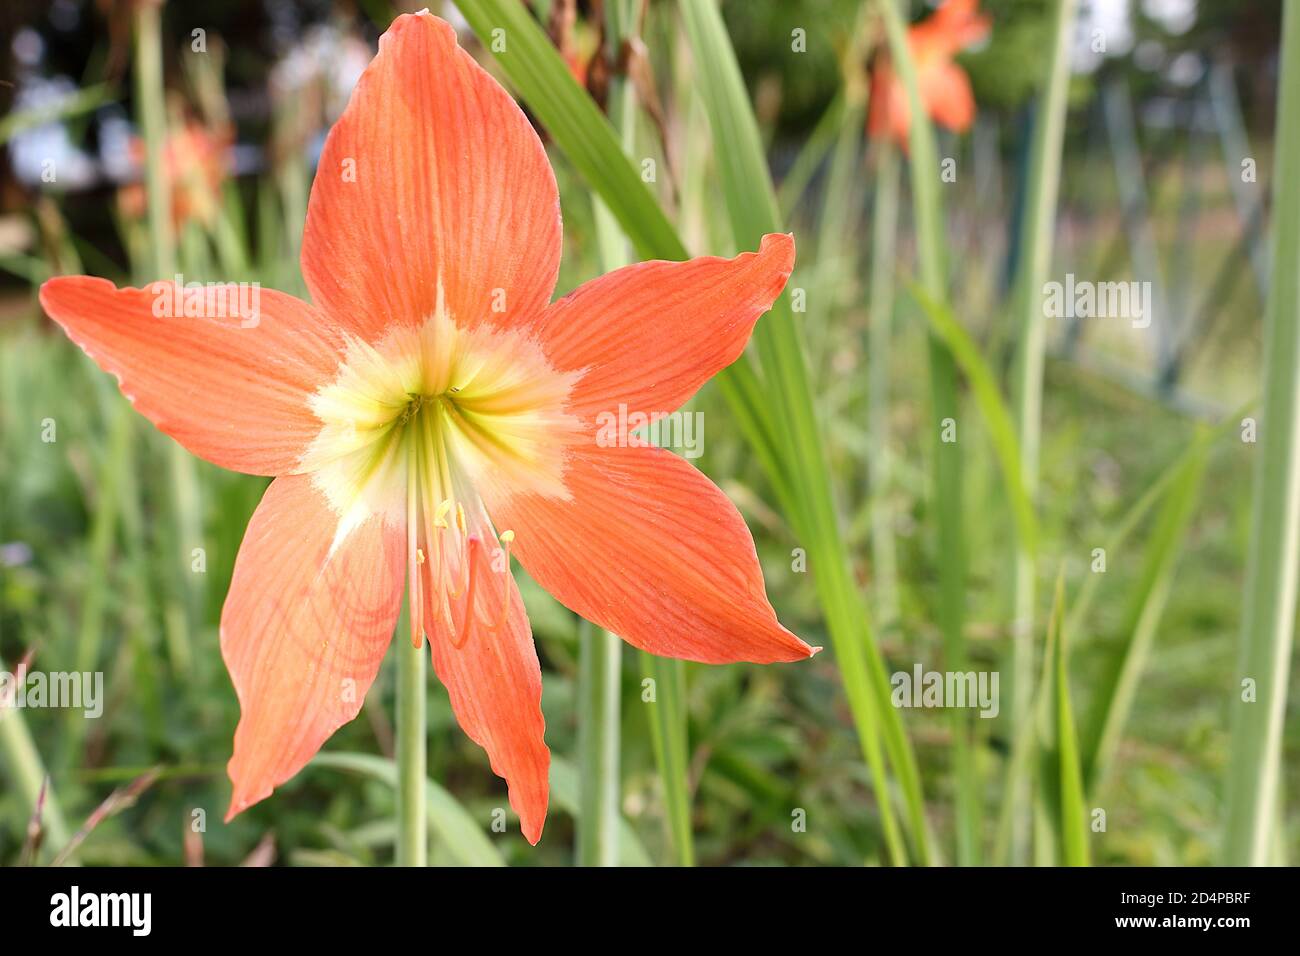 Old Rose color Barbados lilies that bloom almost full frame. Stock Photo